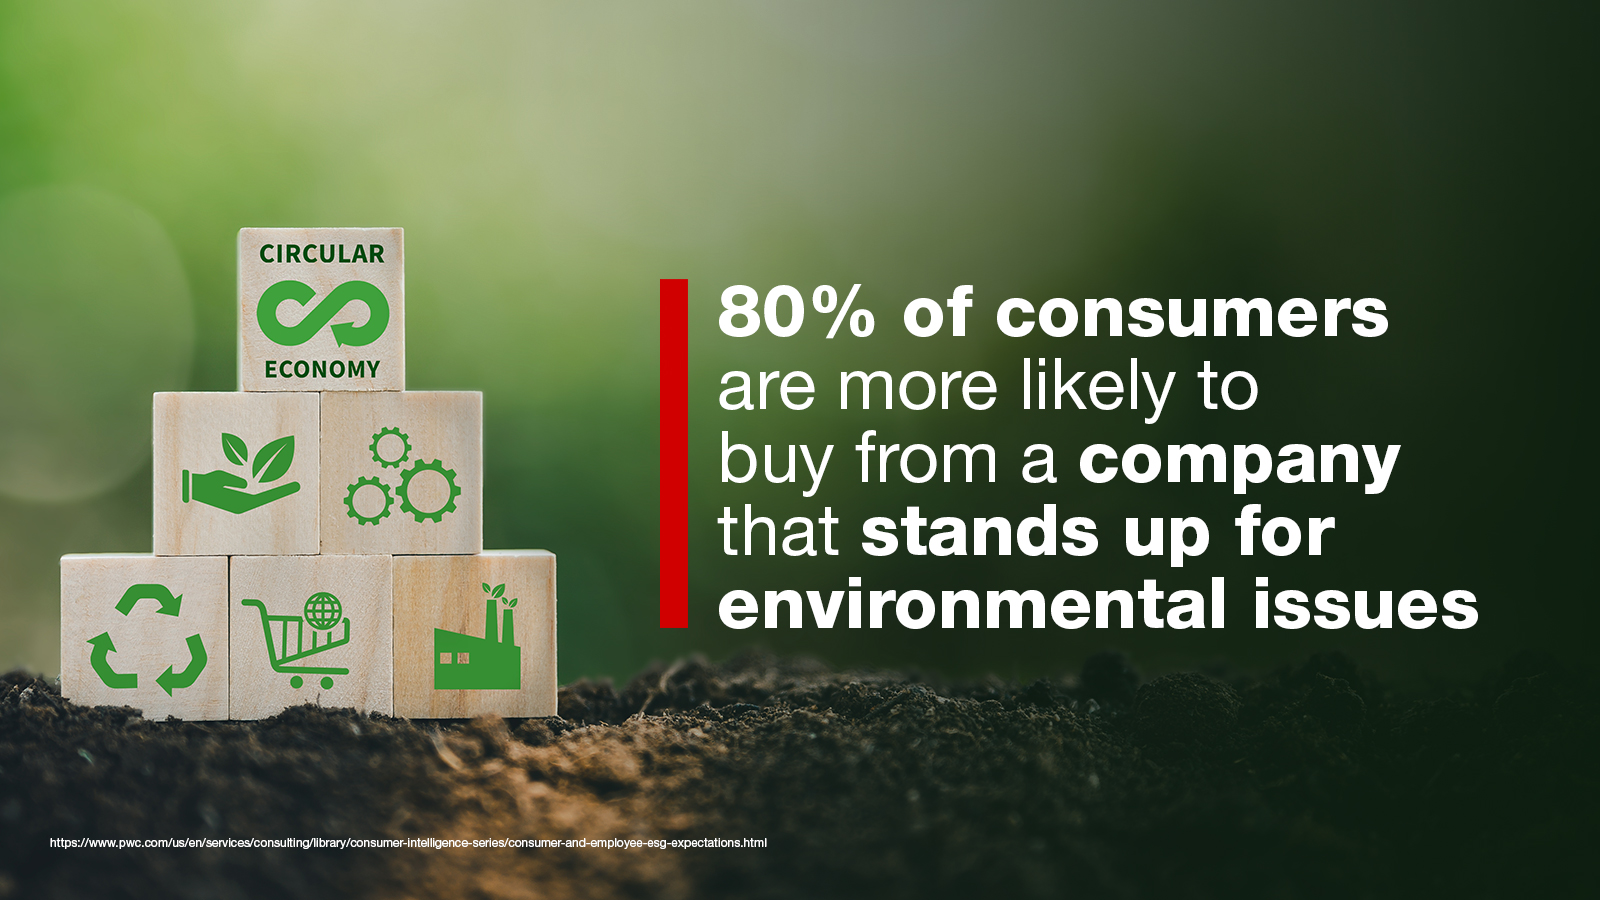 80% of consumers are more likely to buy from a company standing up for environmental issues